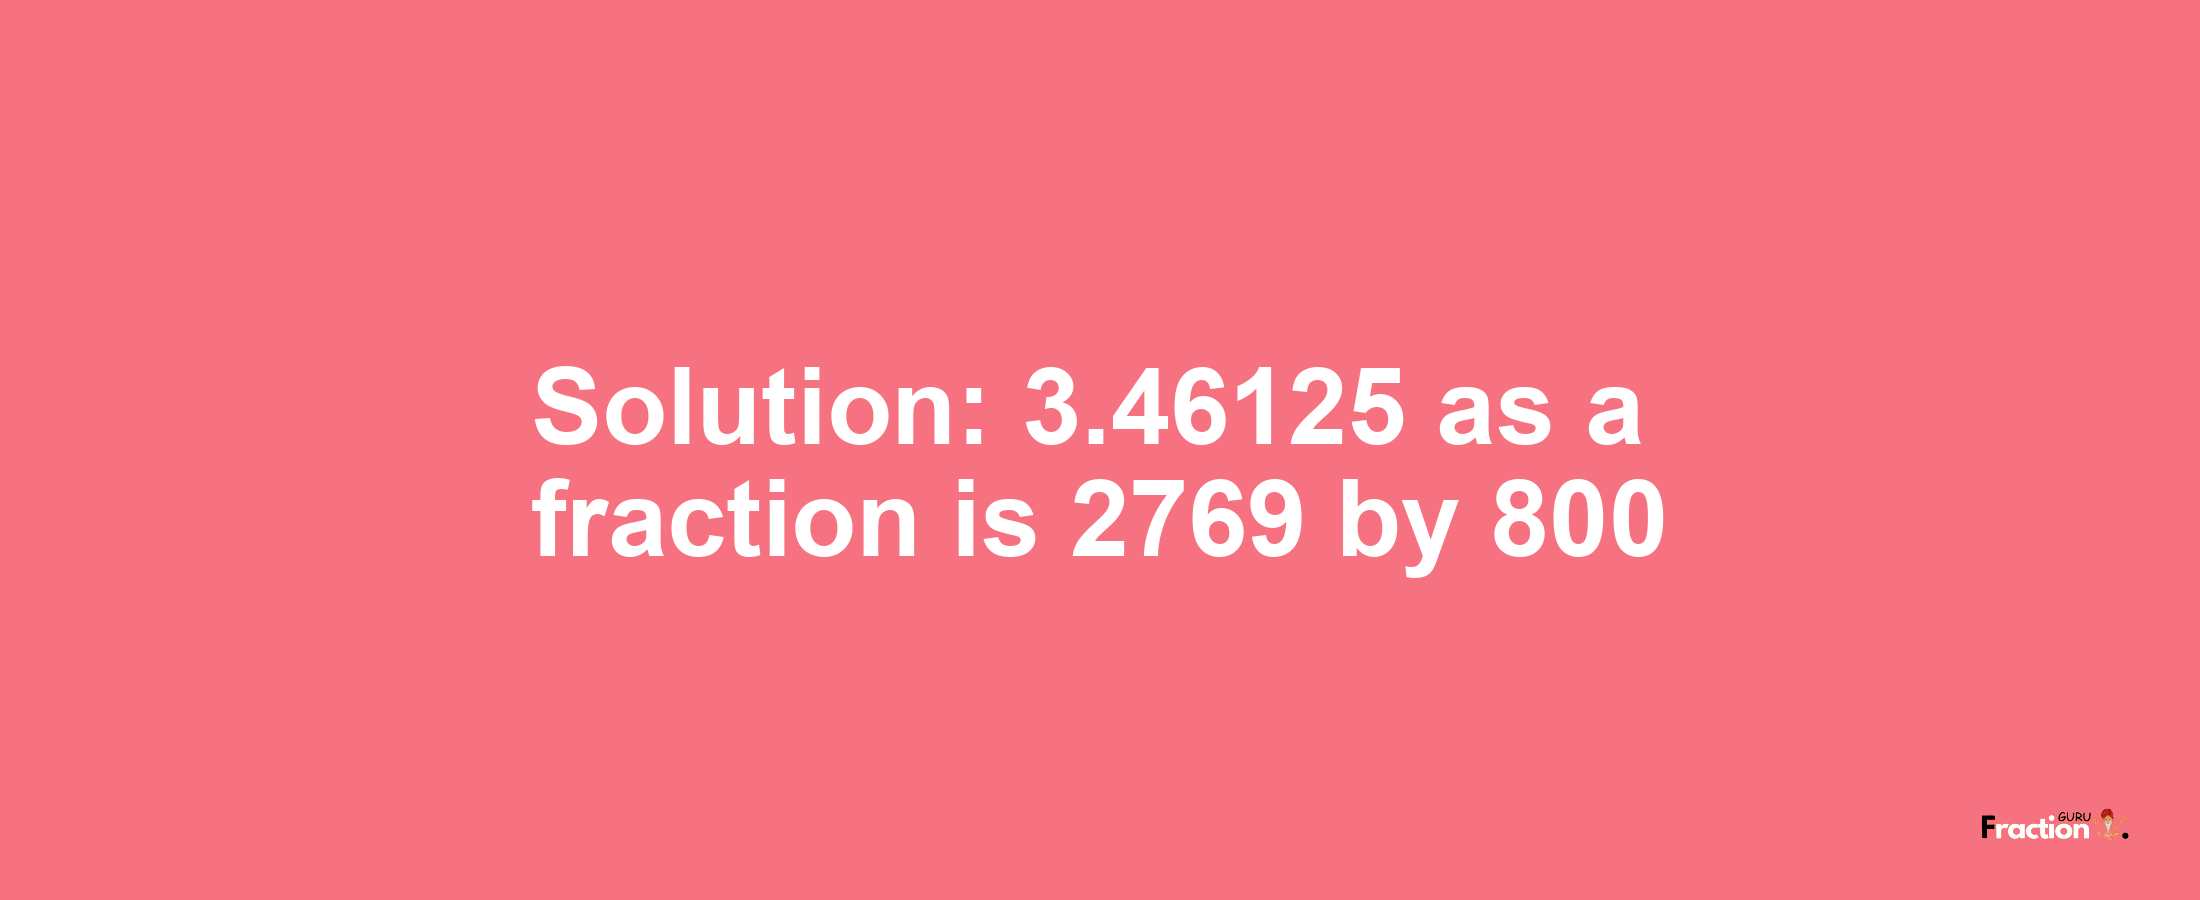 Solution:3.46125 as a fraction is 2769/800